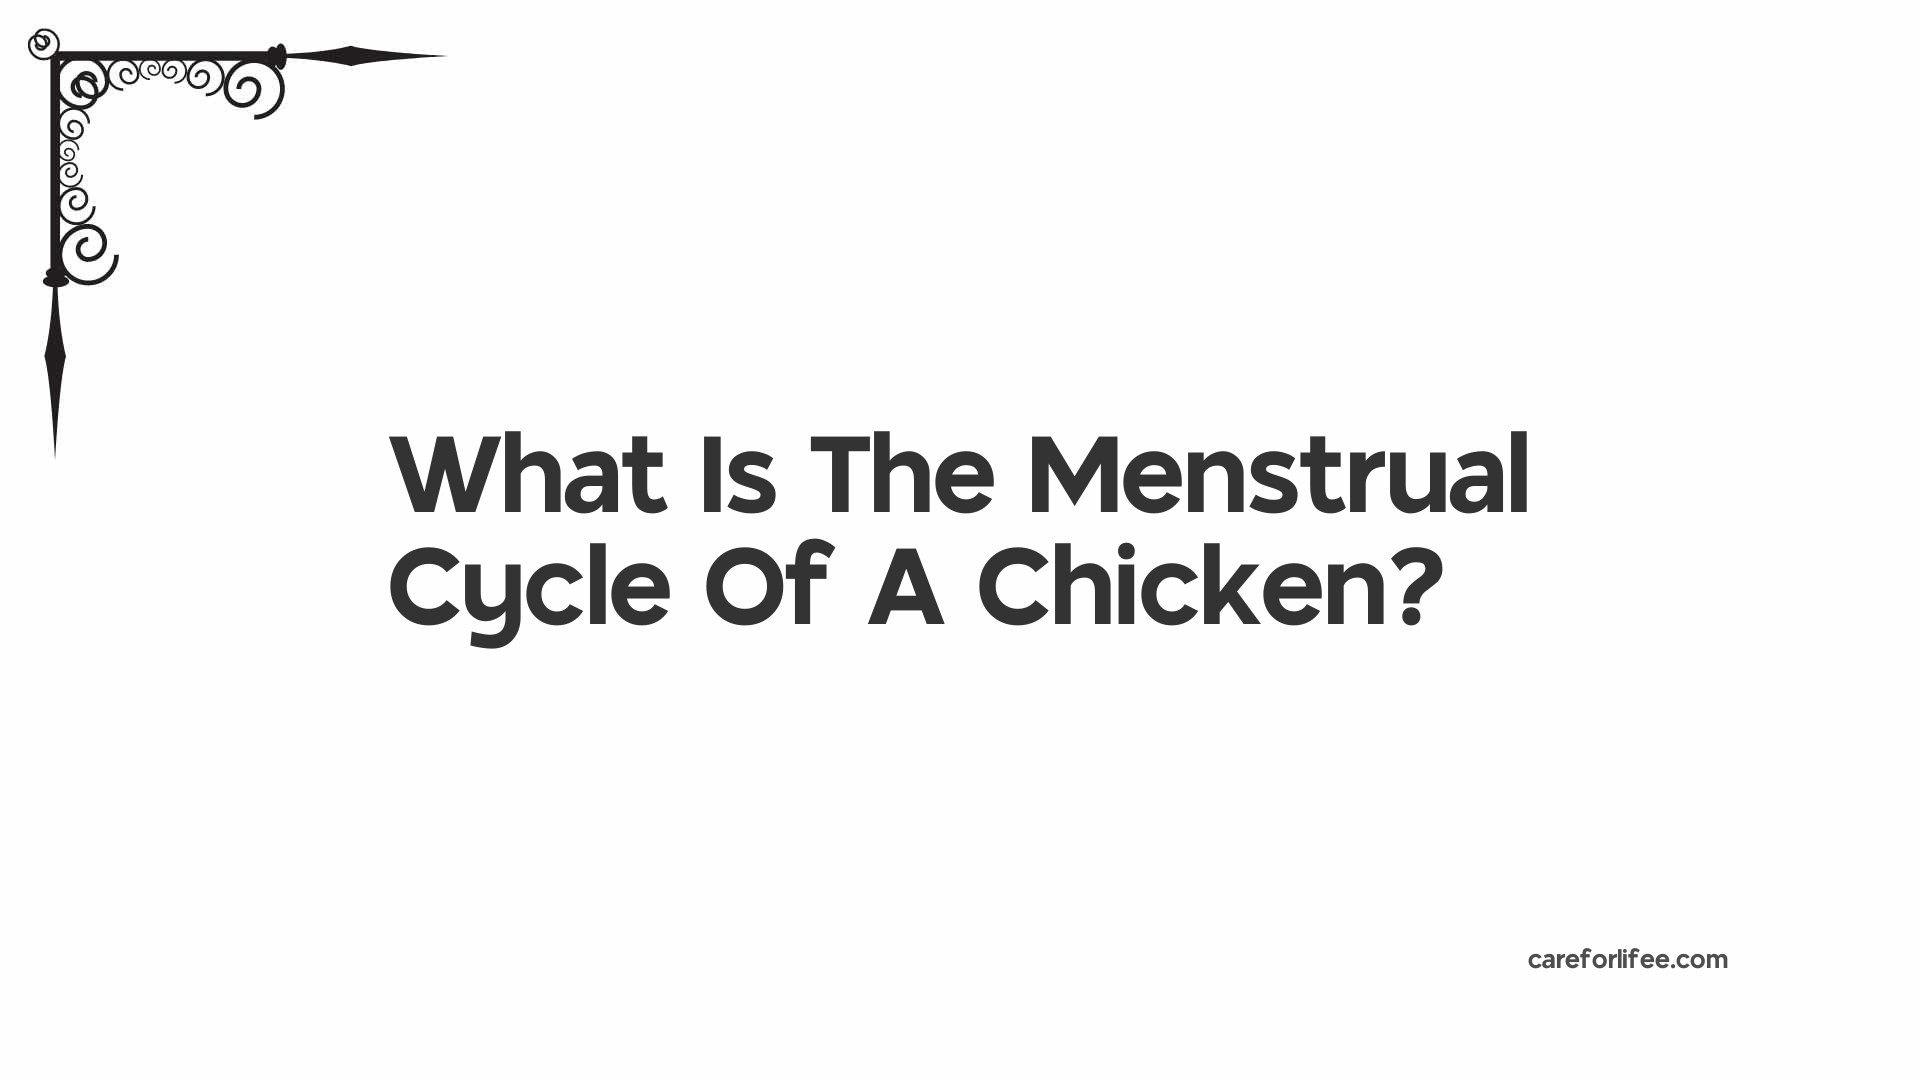 What Is The Menstrual Cycle Of A Chicken?